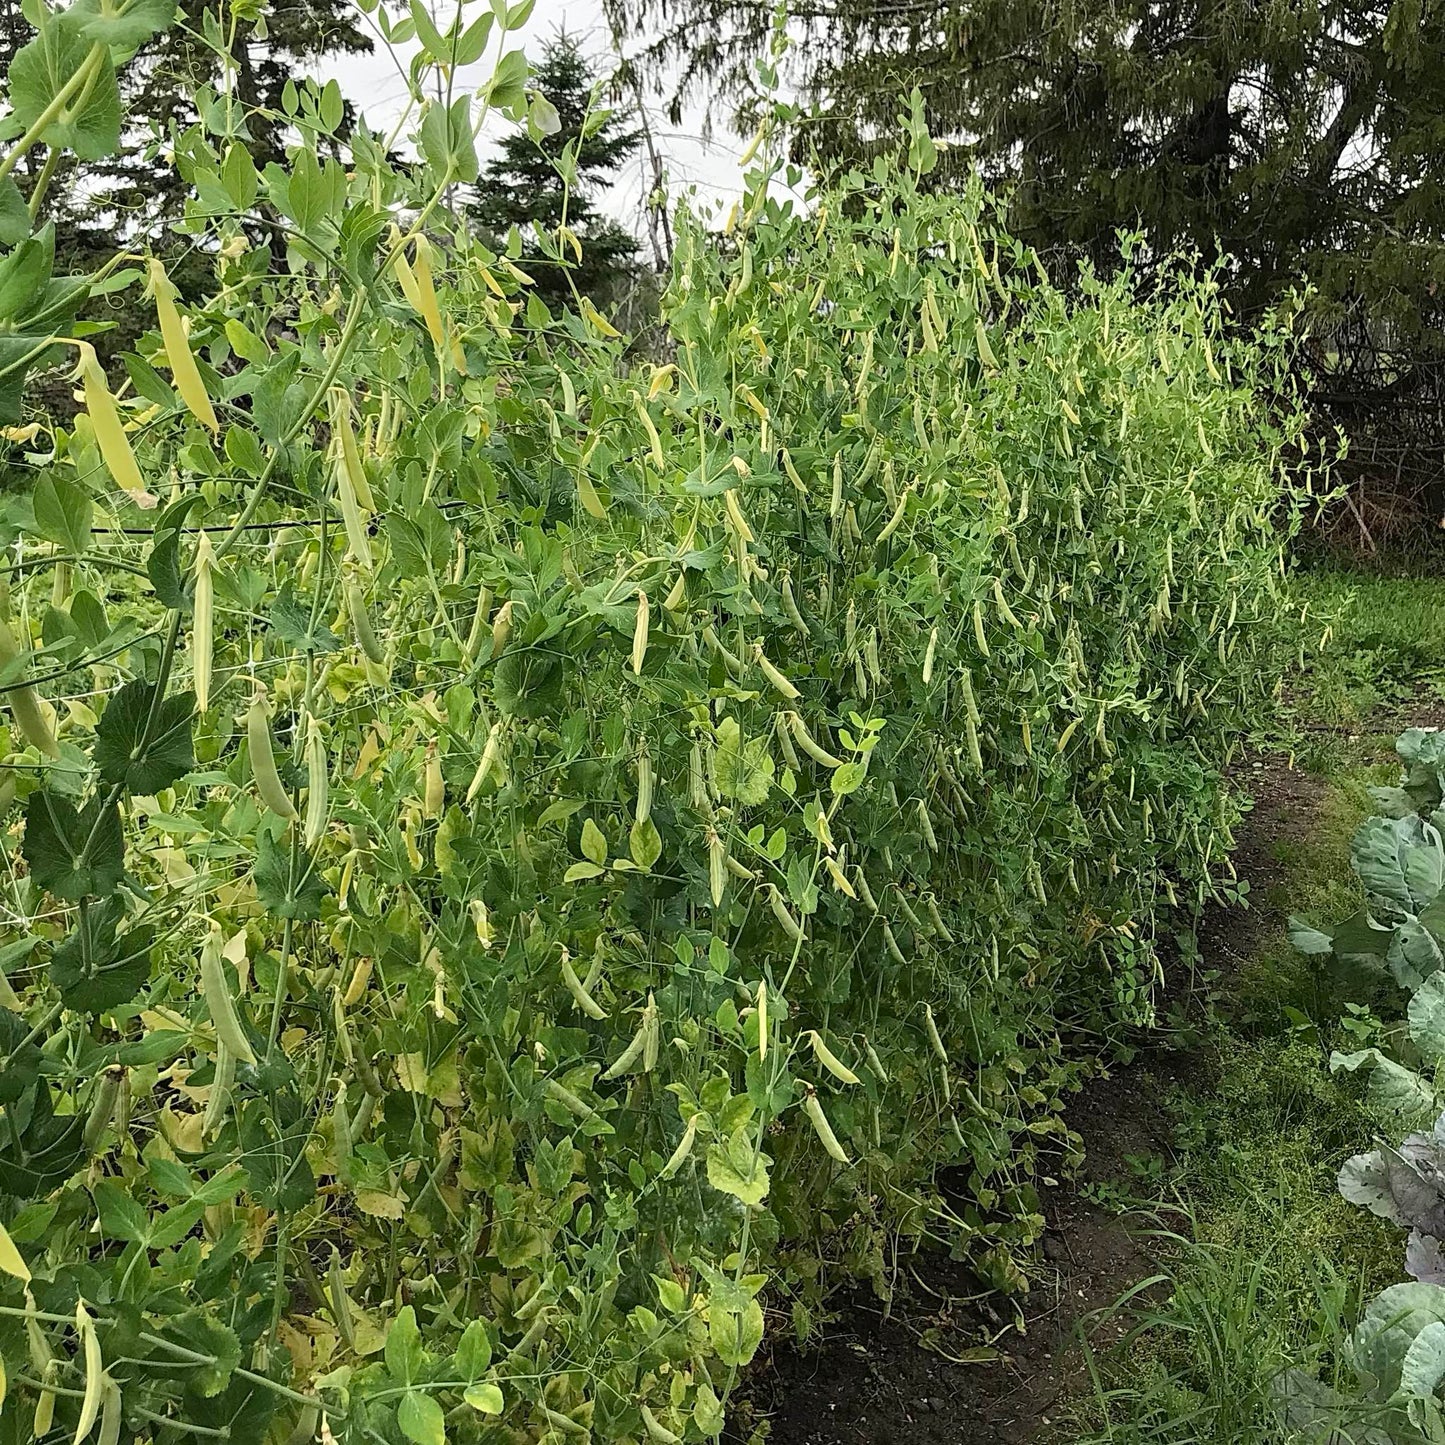 Long trellis full of seven foot tall snap pea vines with yellow pods.